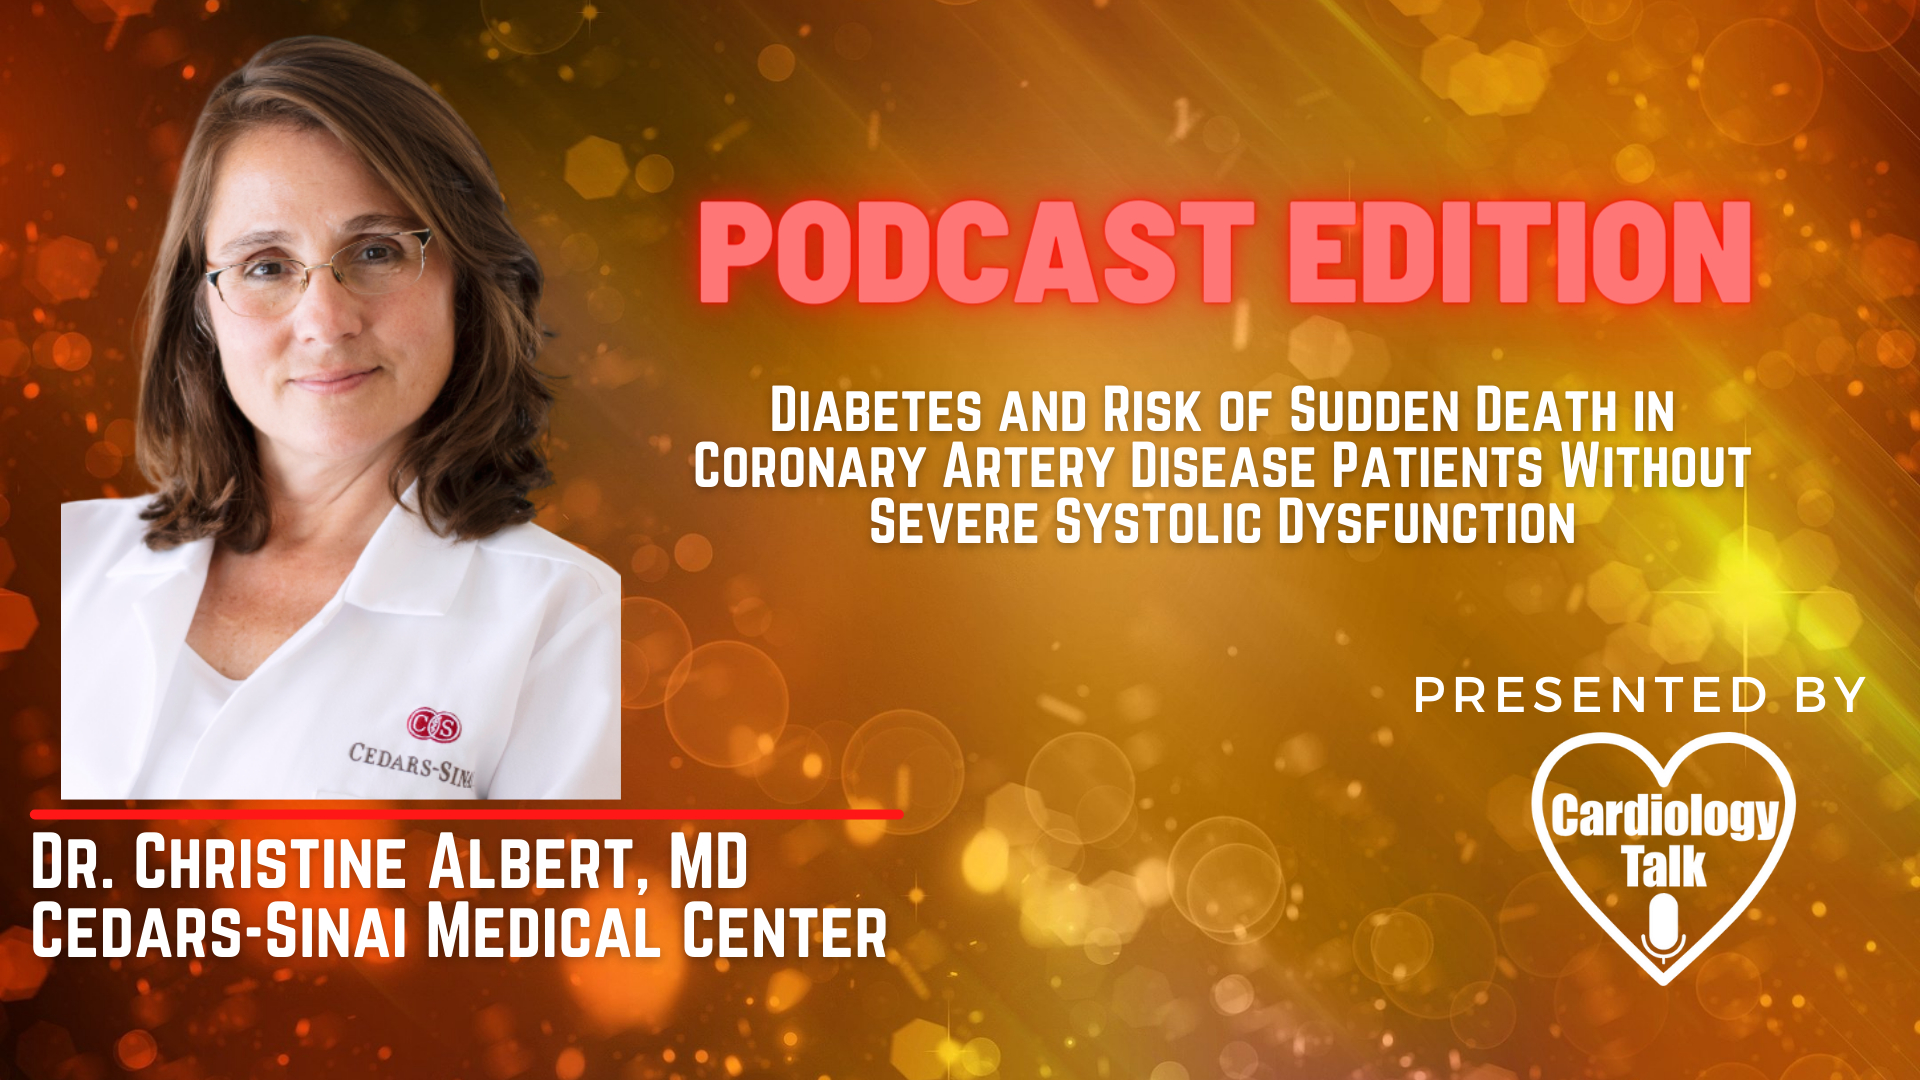 Podcast- Dr. Christine Albert, MD - Diabetes and Risk of Sudden Death in Coronary Artery Disease Patients Without Severe Systolic Dysfunction @CMAlbertEP   @CedarsSinaiMed  #CoronaryArter...